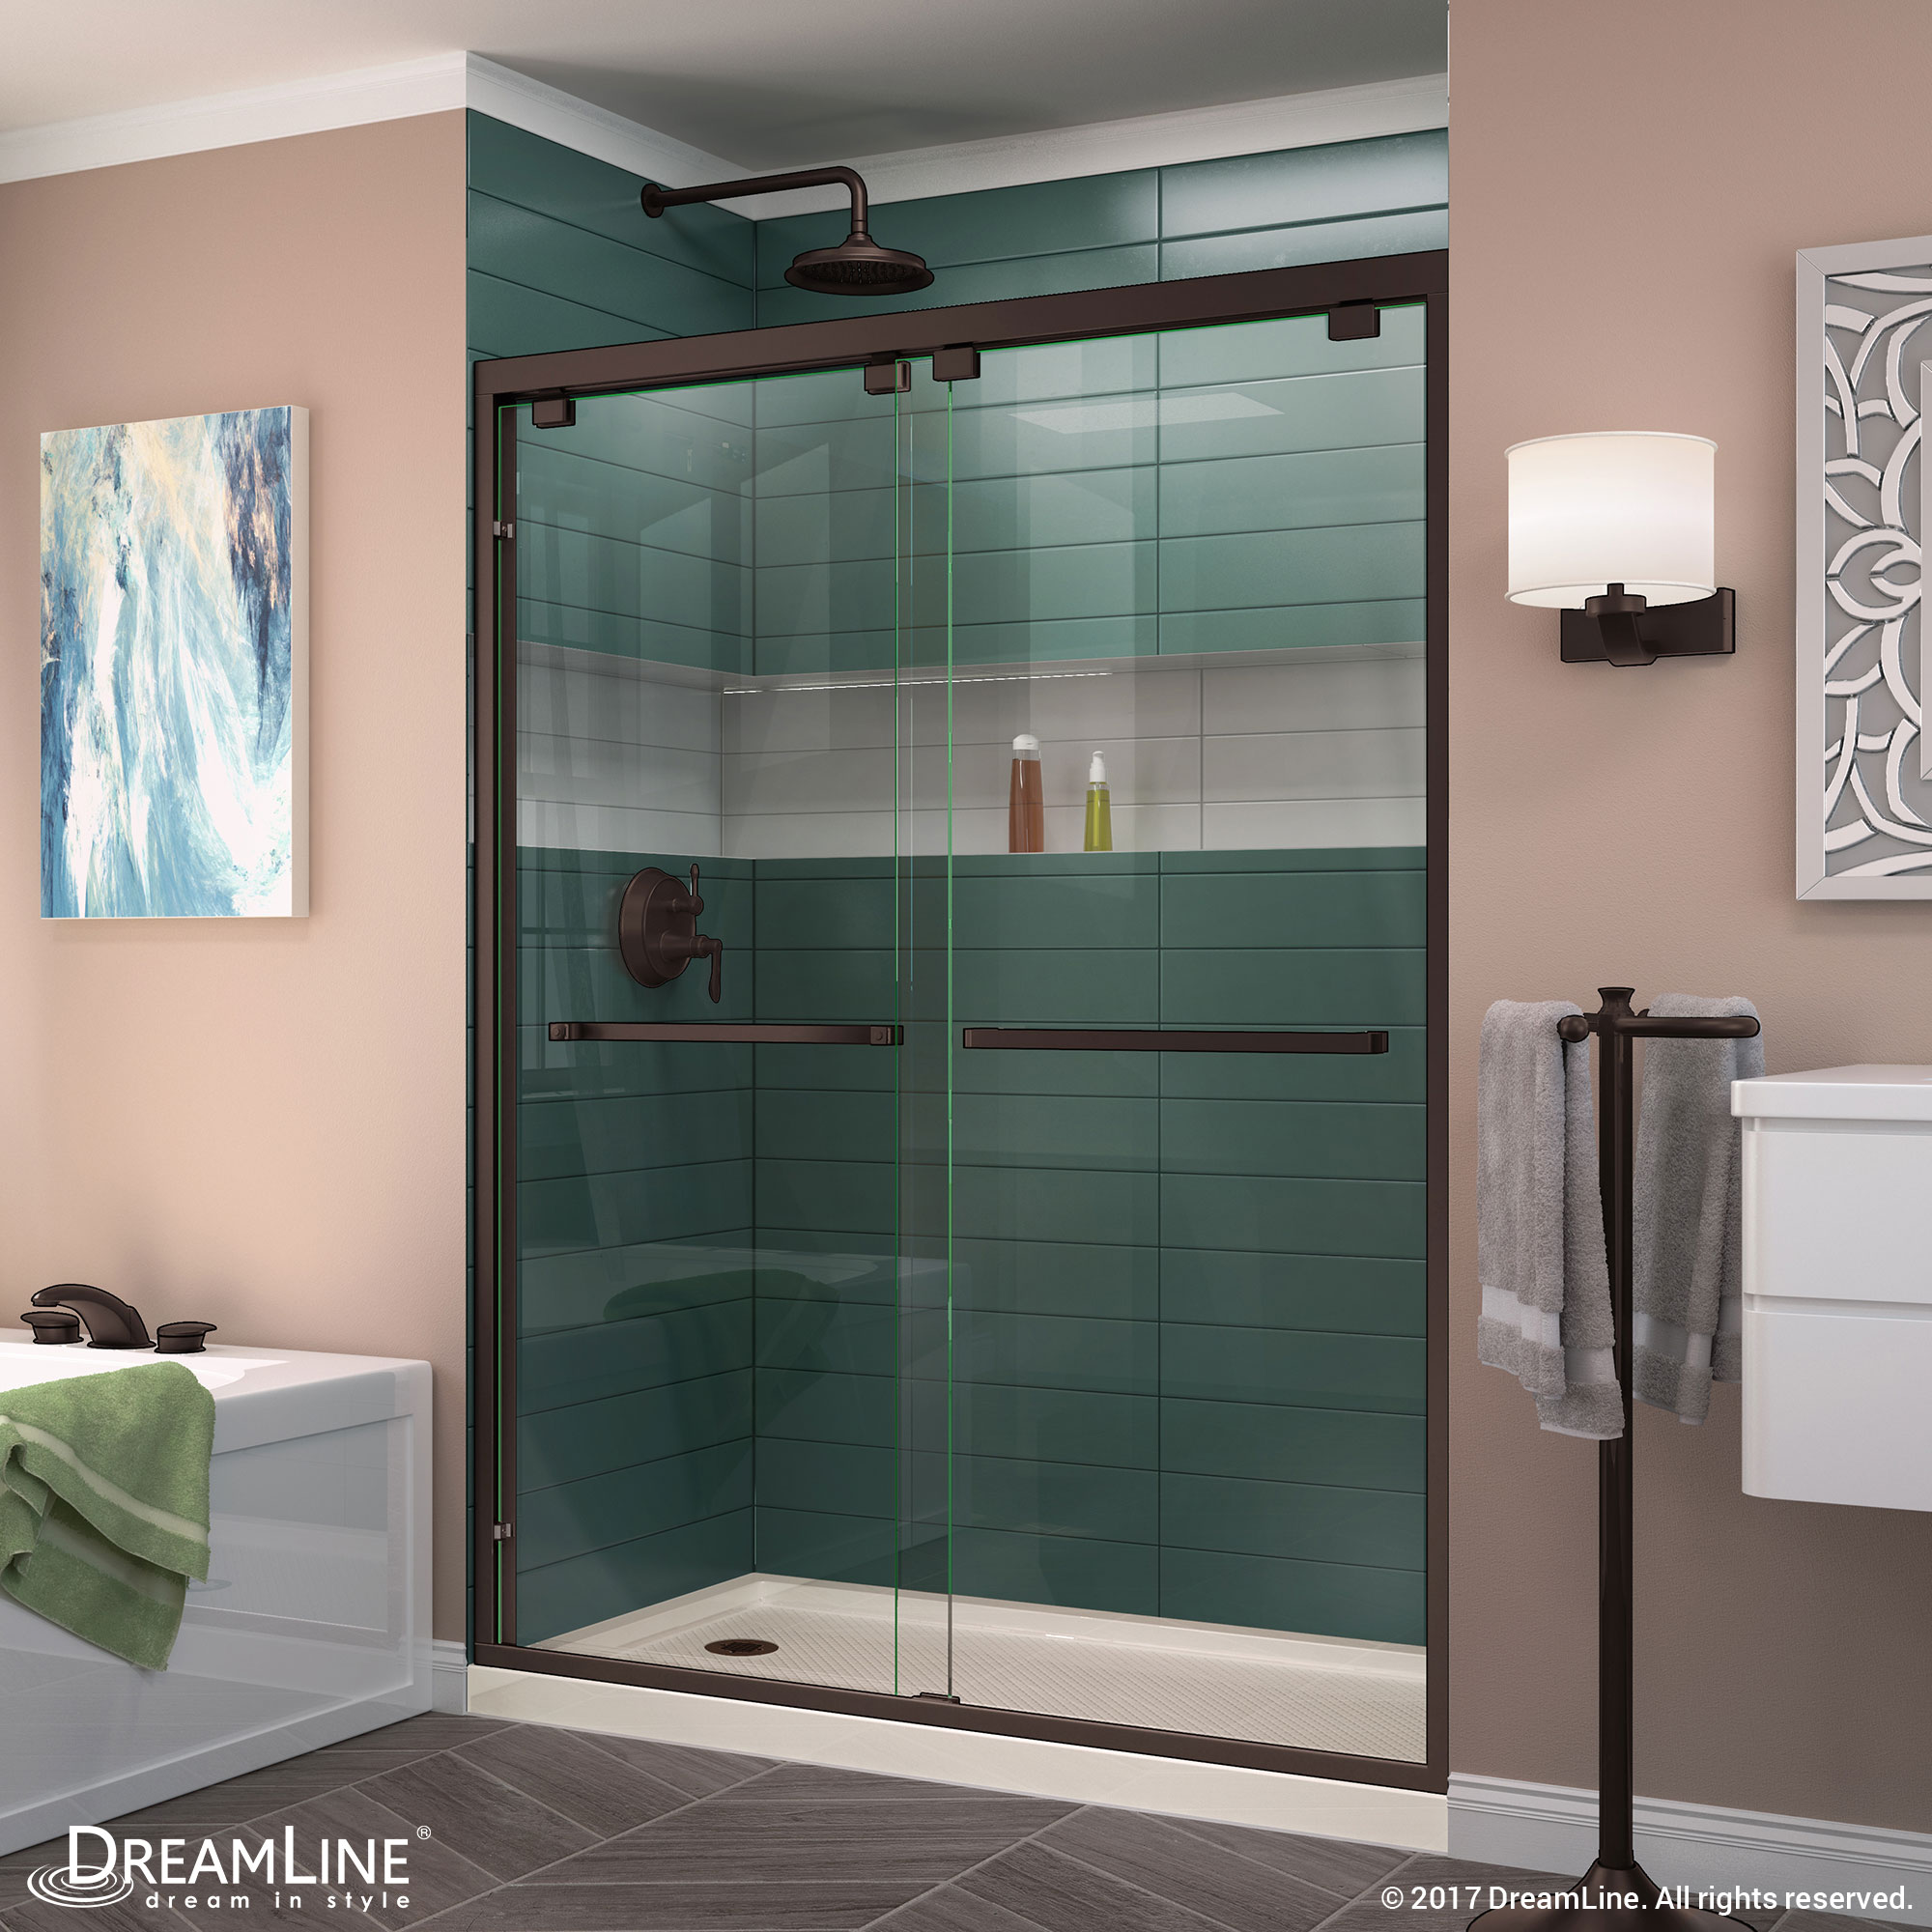 DreamLine Encore 32 in. D x 54 in. W x 78 3/4 in. H Bypass Shower Door in Chrome and Center Drain Biscuit Base Kit